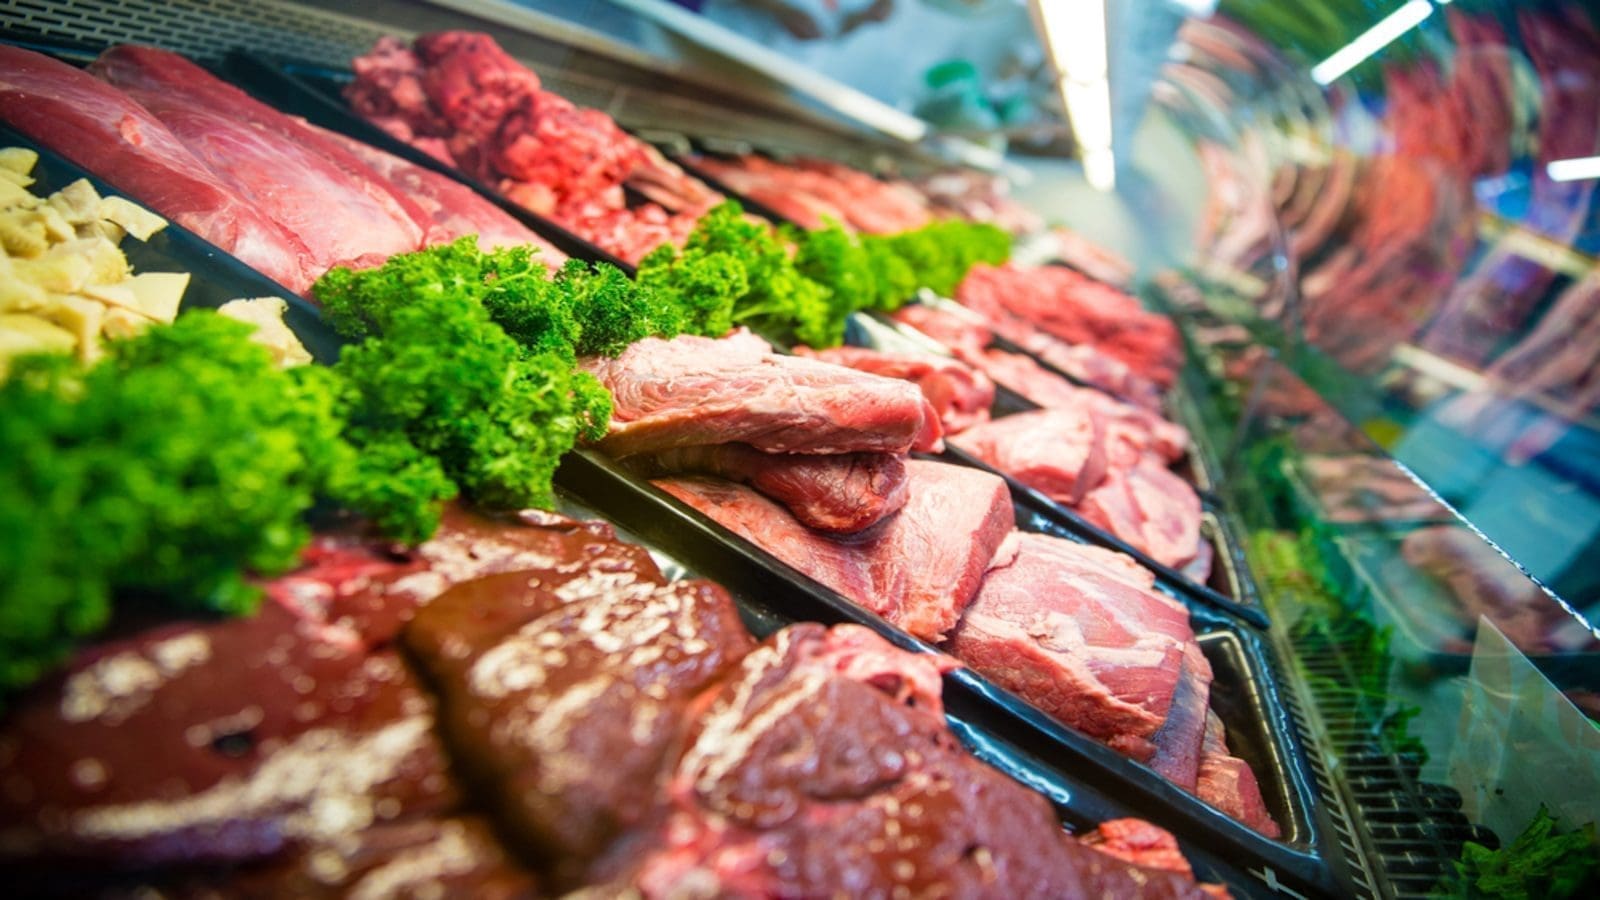 Meat producers to will not have the liquidity and the profitability needed for further investment in 2023, S&P Global report highlights